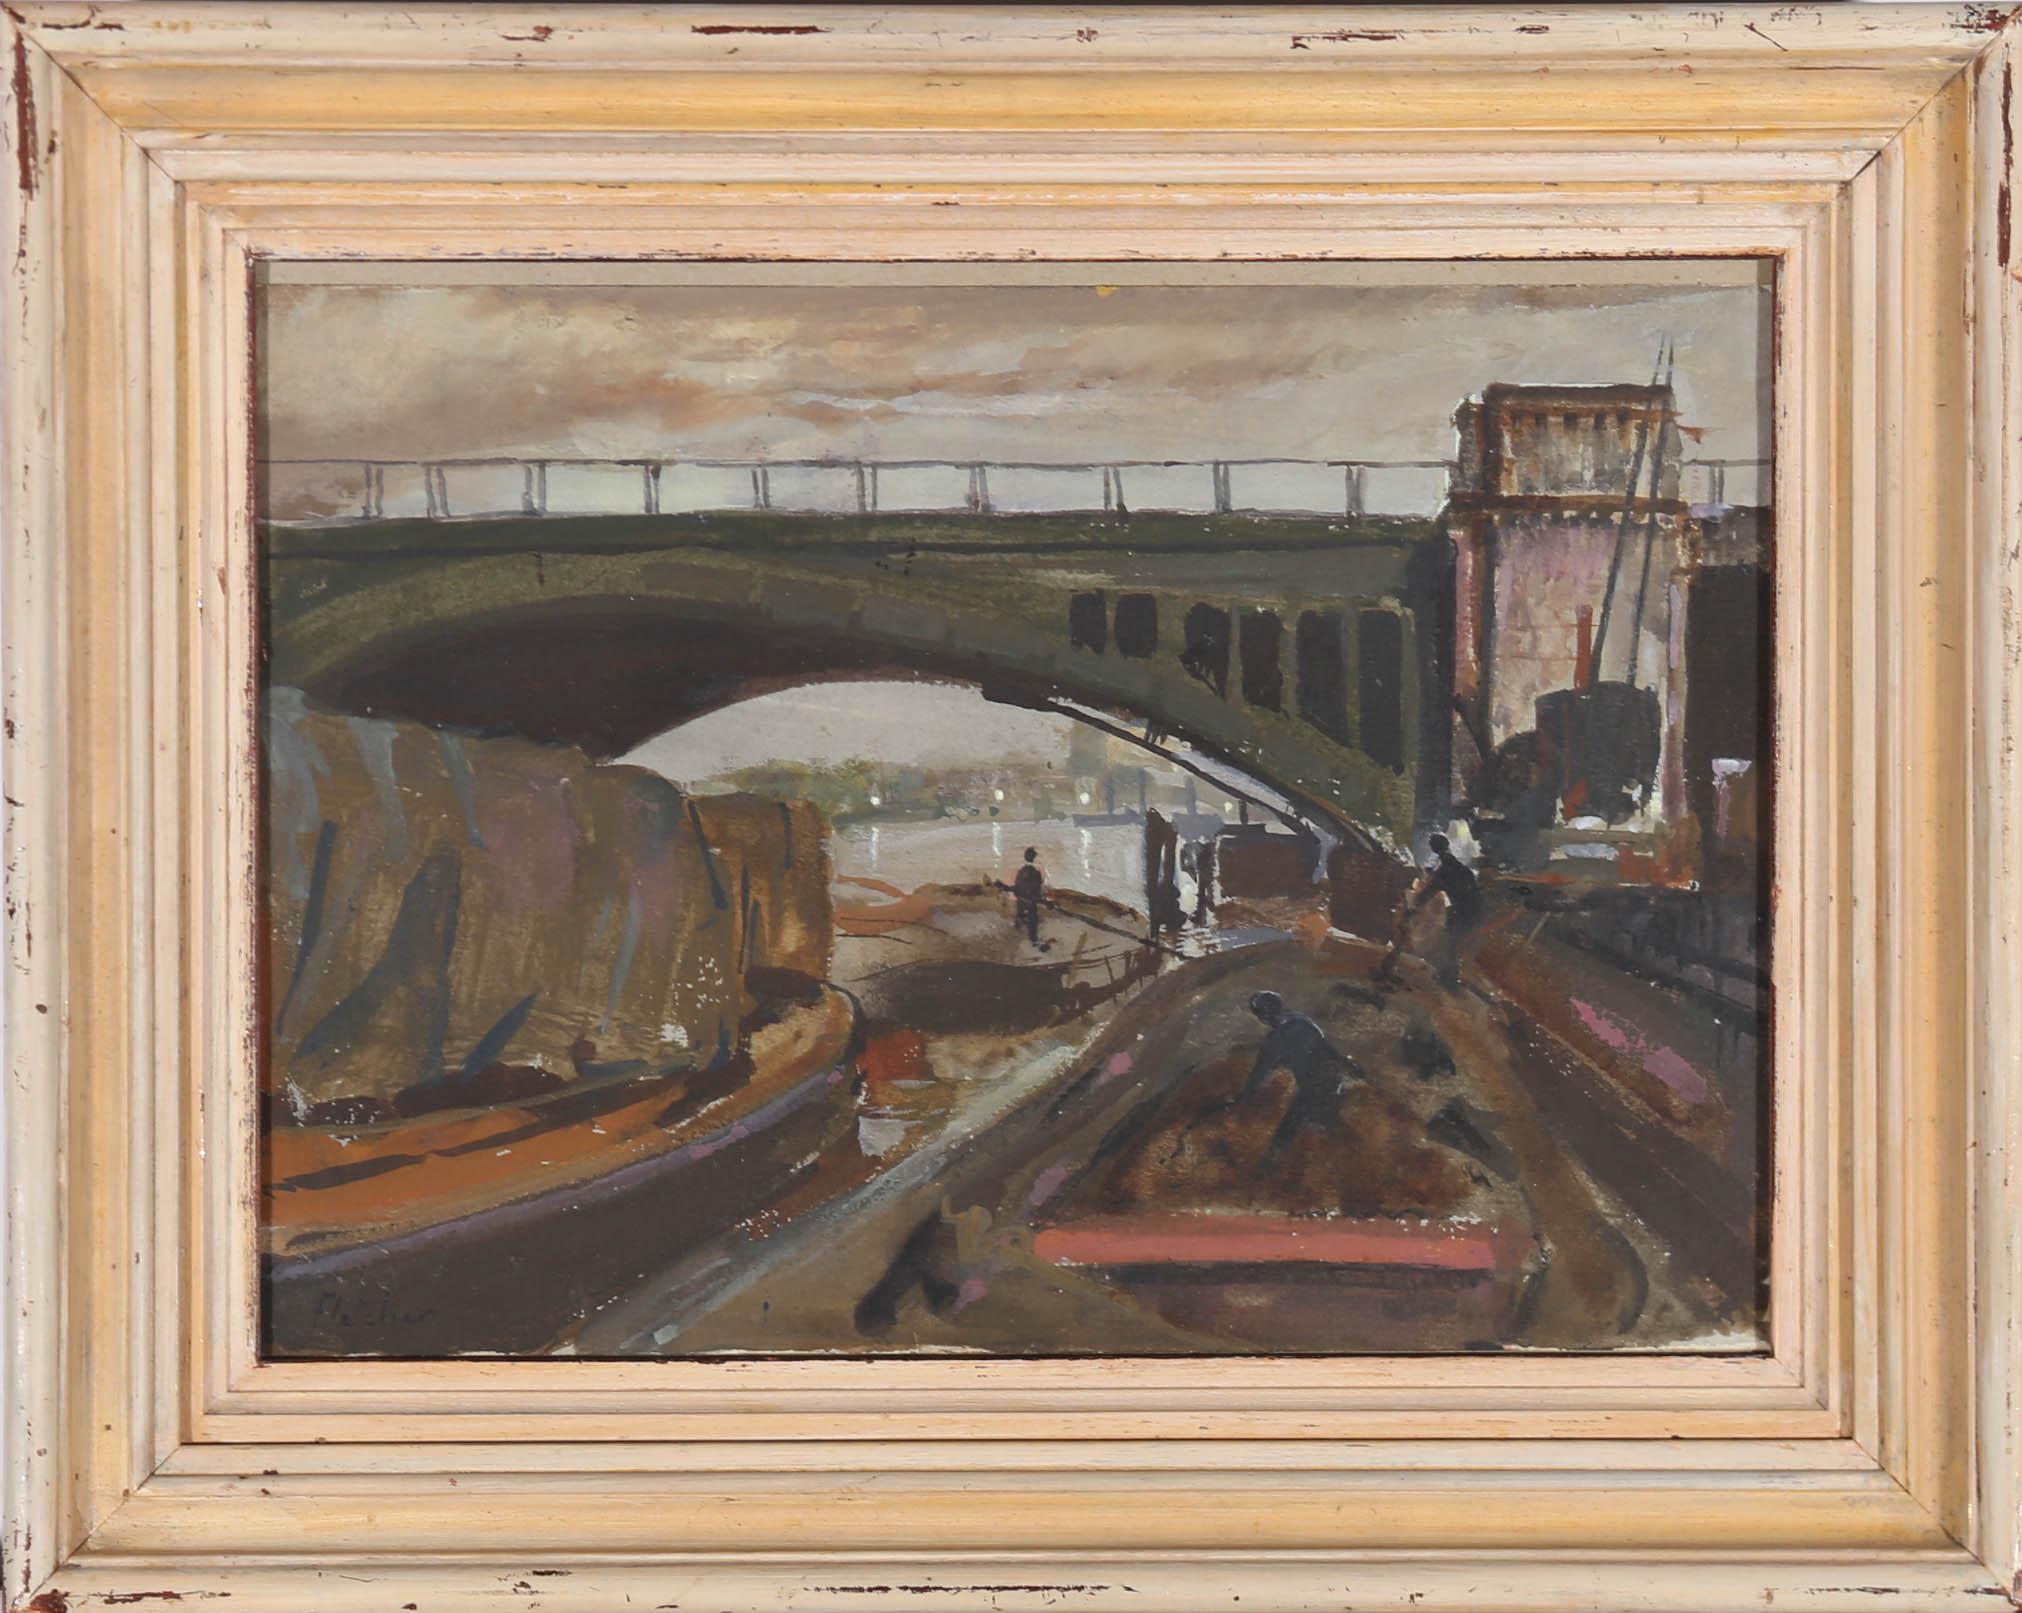 A charming gouache study of men working on barges under a bridge on the River Thames. The artist uses a dark palette to capture the atmosphere of a cloudy London day. Presented in a glazed wooden frame. Signed to the lower left. On paper laid to